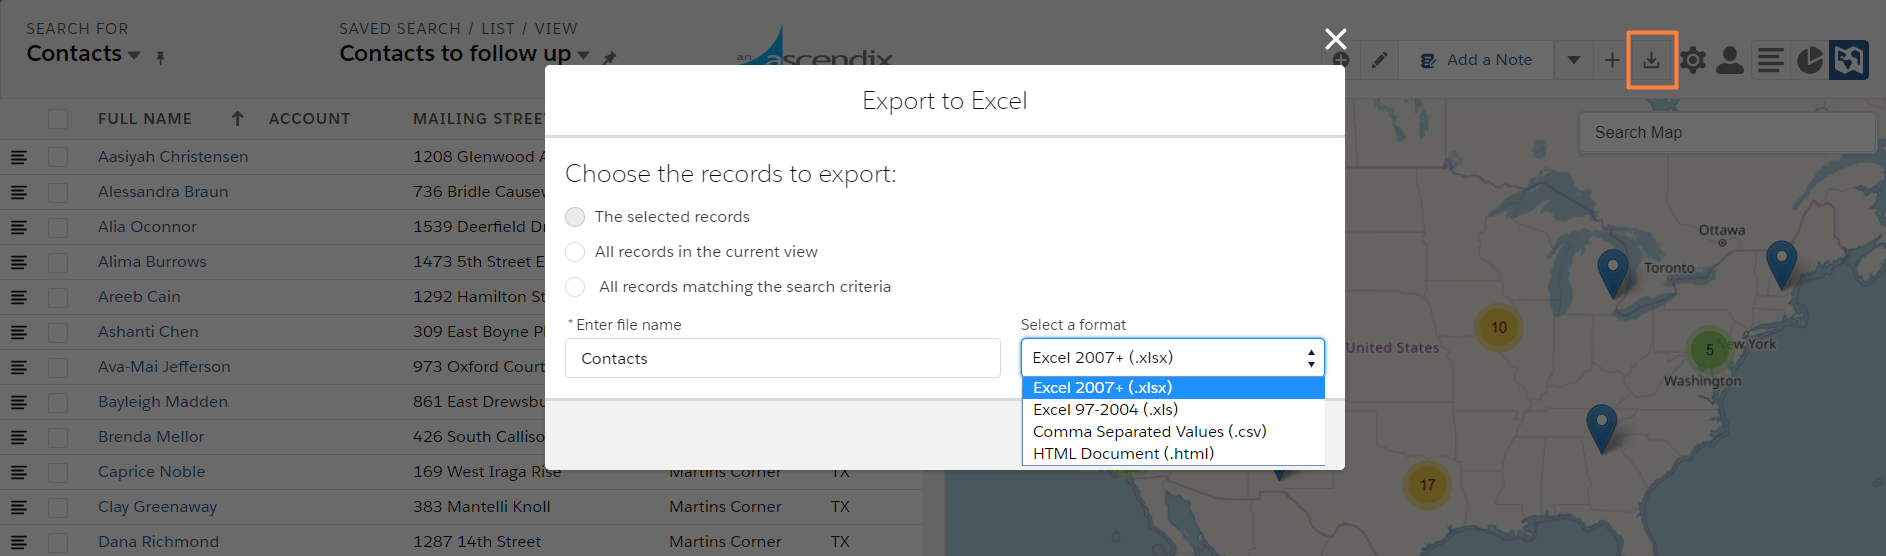 Export to Excel Ascendix Search for Salesforce